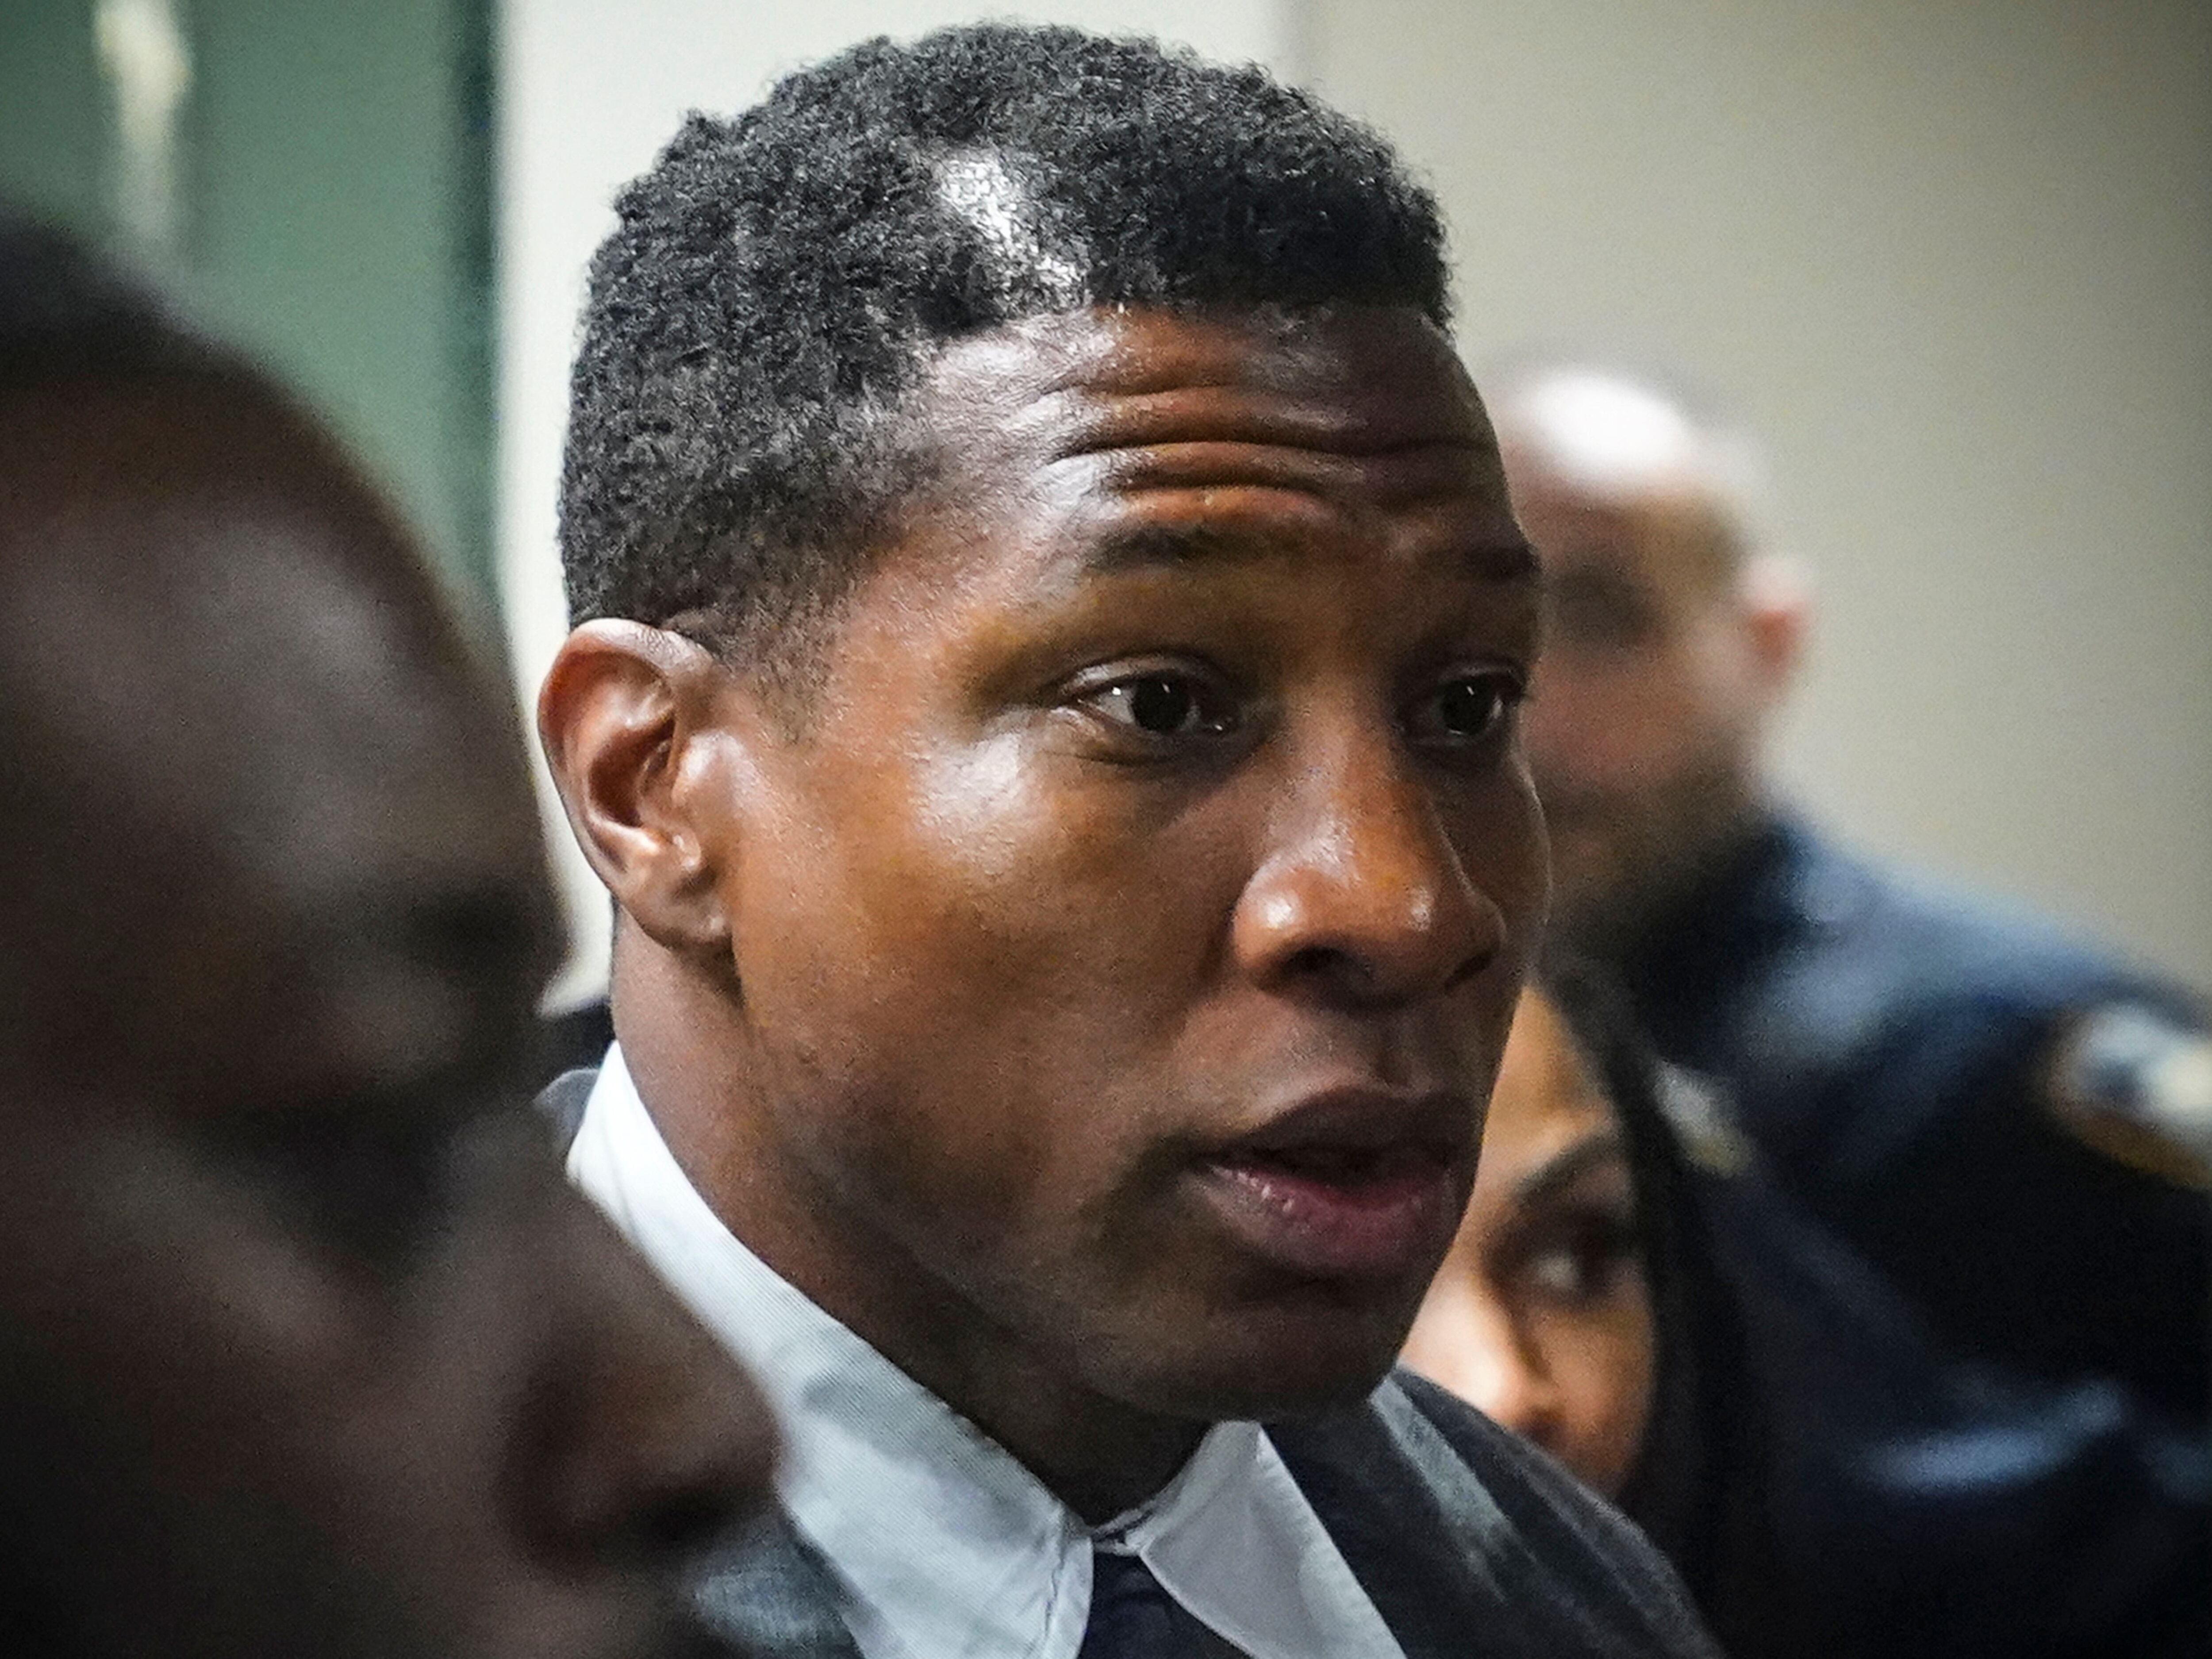 Jurors hear closing arguments in domestic violence trial of Jonathan Majors